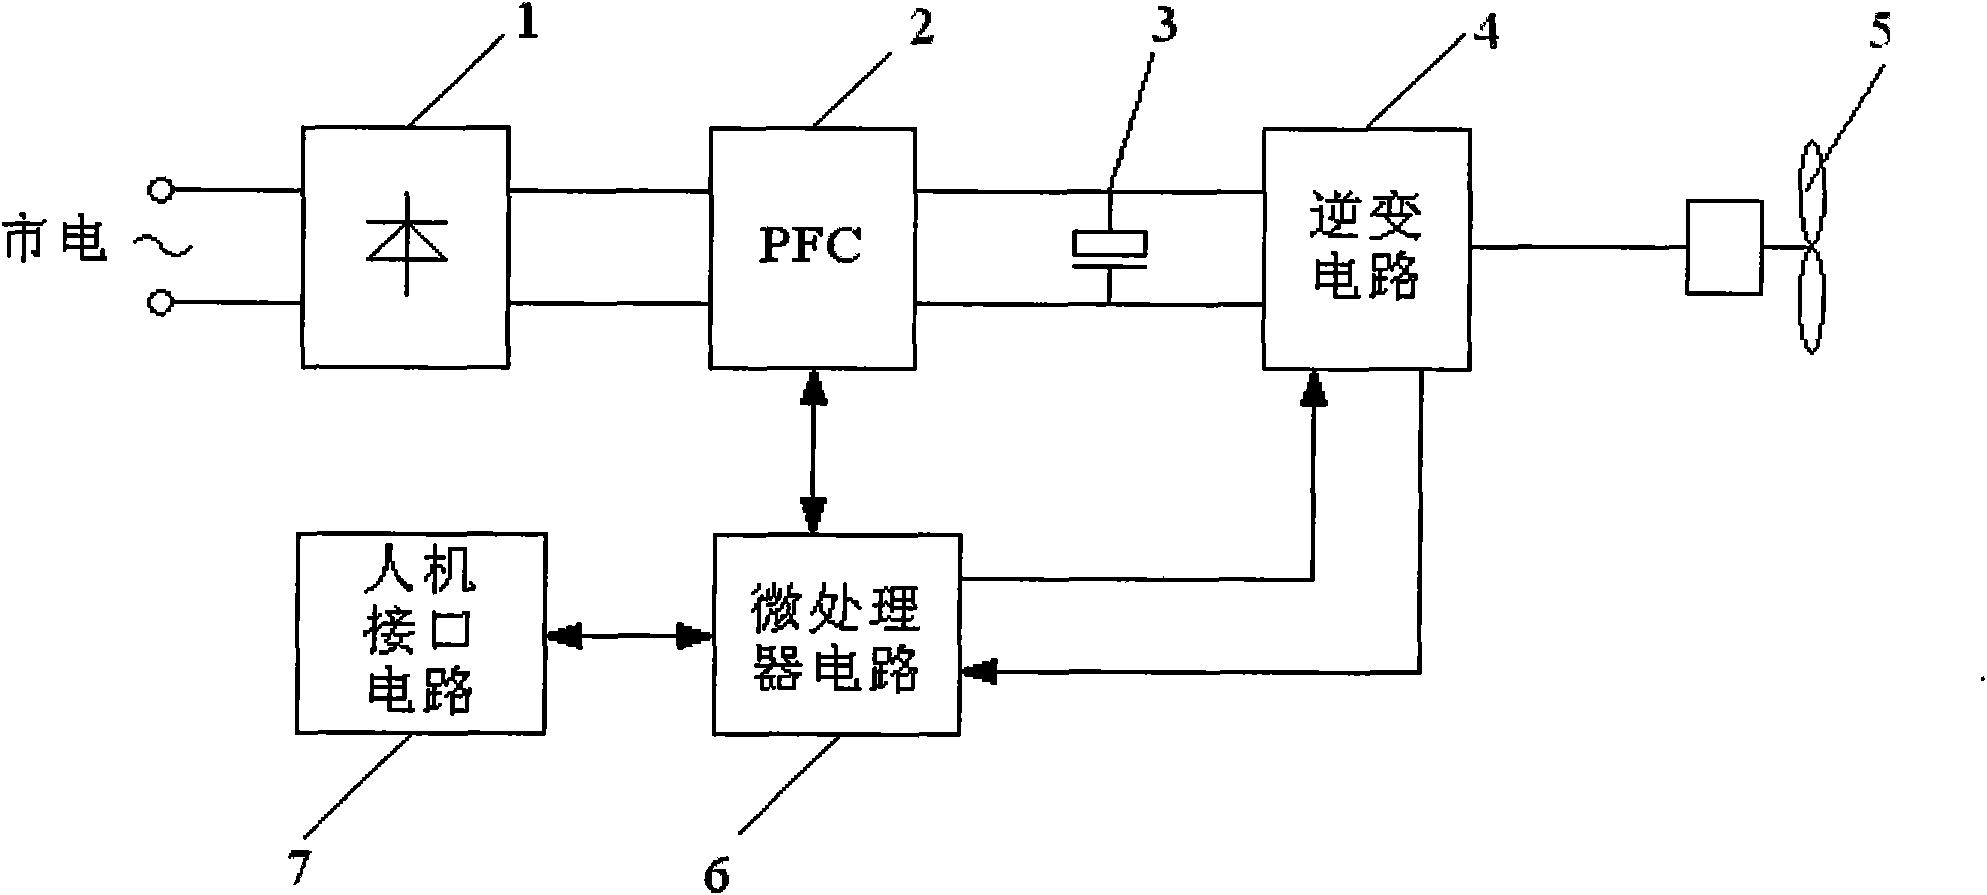 Direct-current frequency conversion electric fan